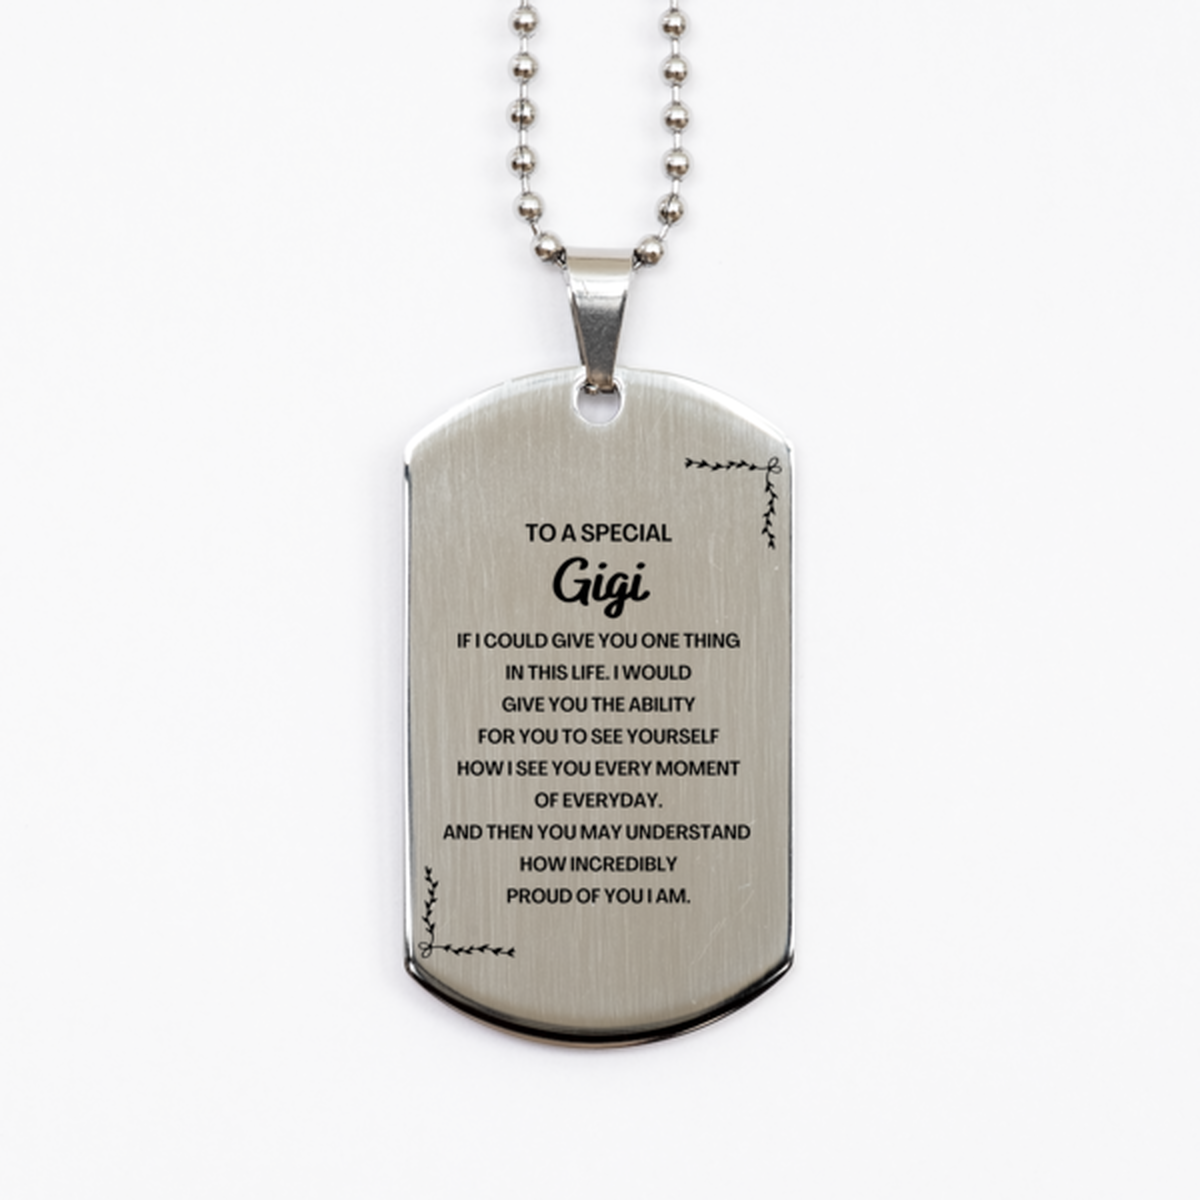 To My Gigi Silver Dog Tag, Gifts For Gigi Engraved, Inspirational Gifts for Christmas Birthday, Epic Gifts for Gigi To A Special Gigi how incredibly proud of you I am